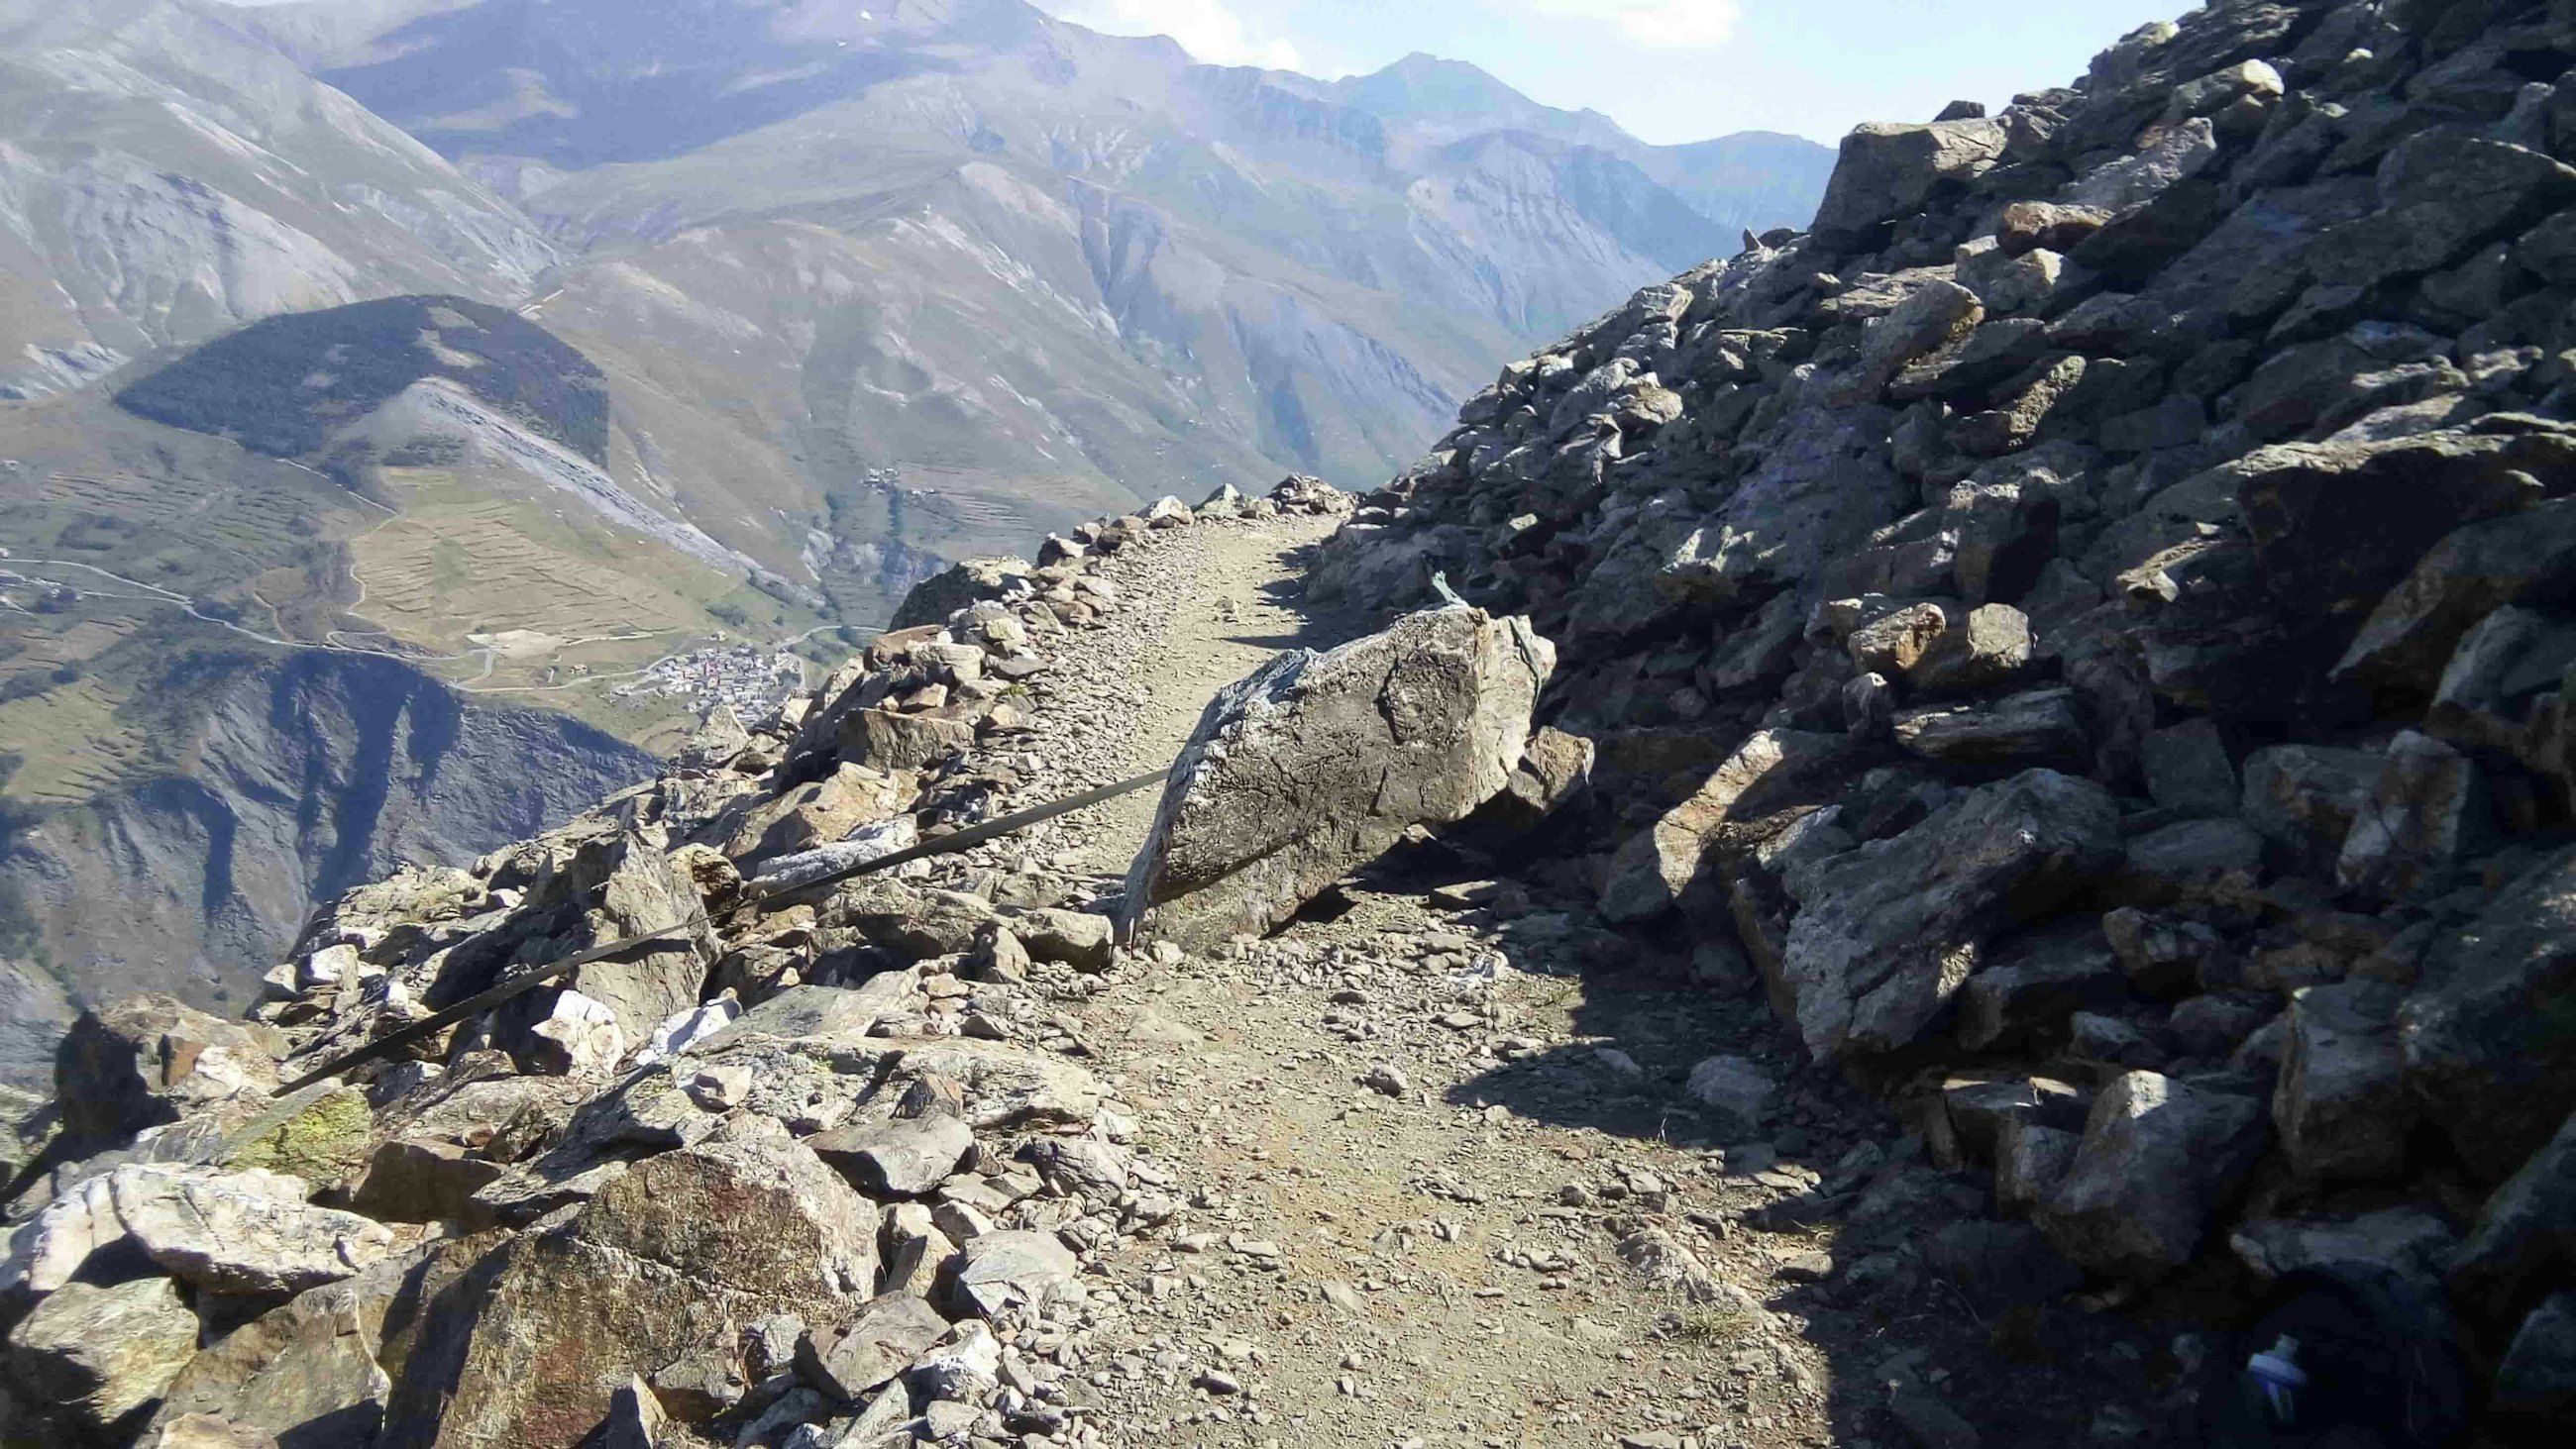 A rocky section of trail in La Grave with larger mountains in the background